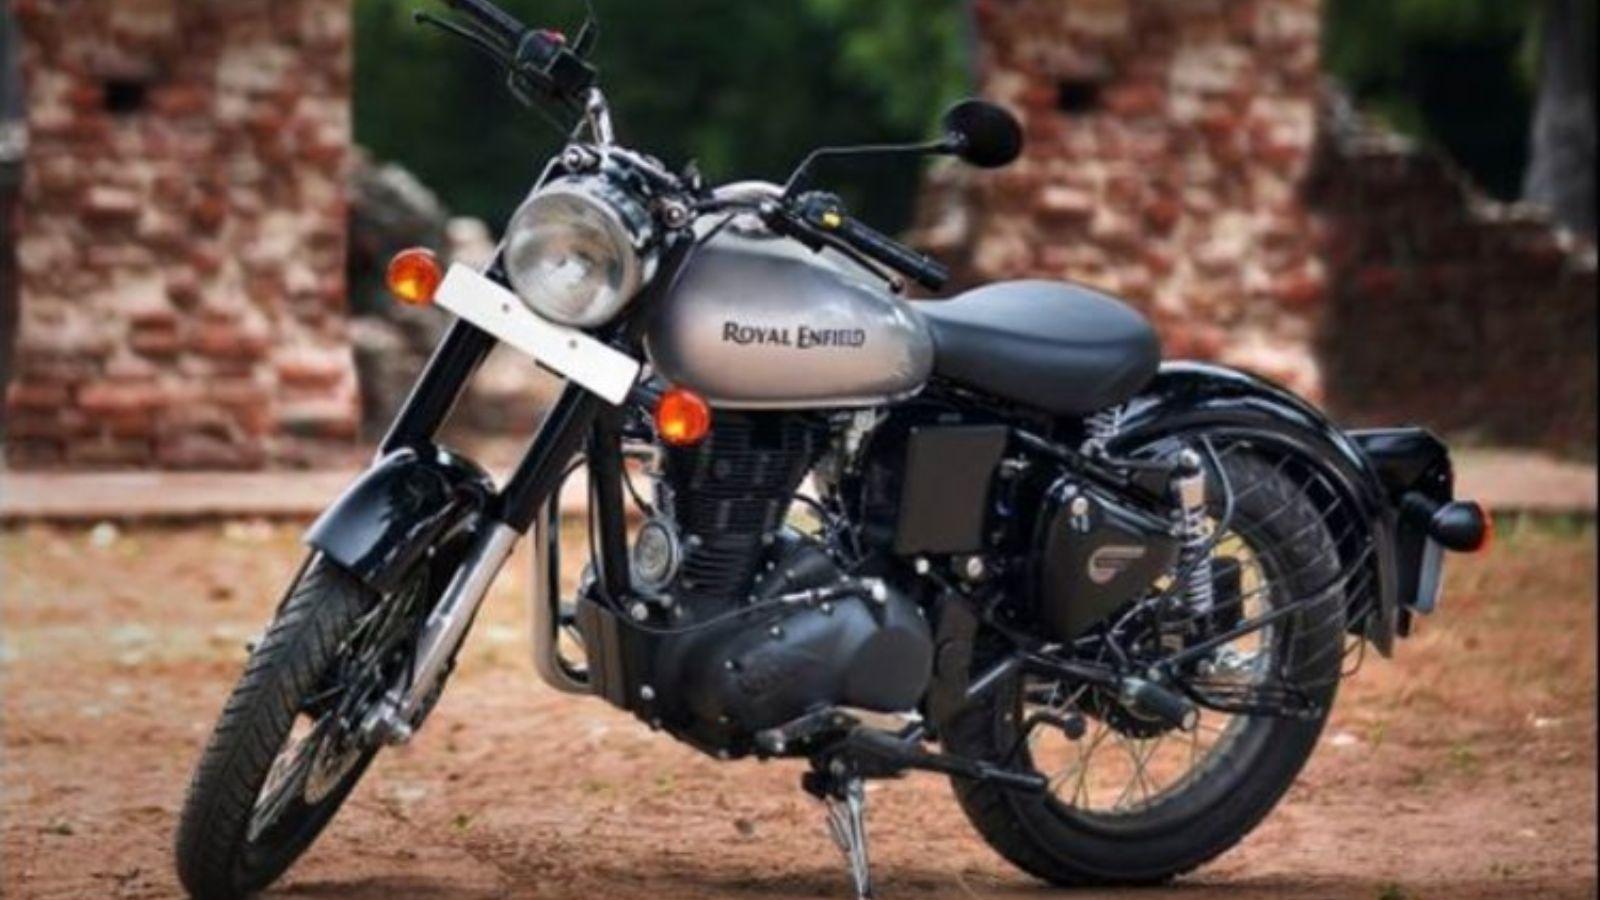 Royal Enfield 350 Classic Wallpapers - Wallpaper Cave